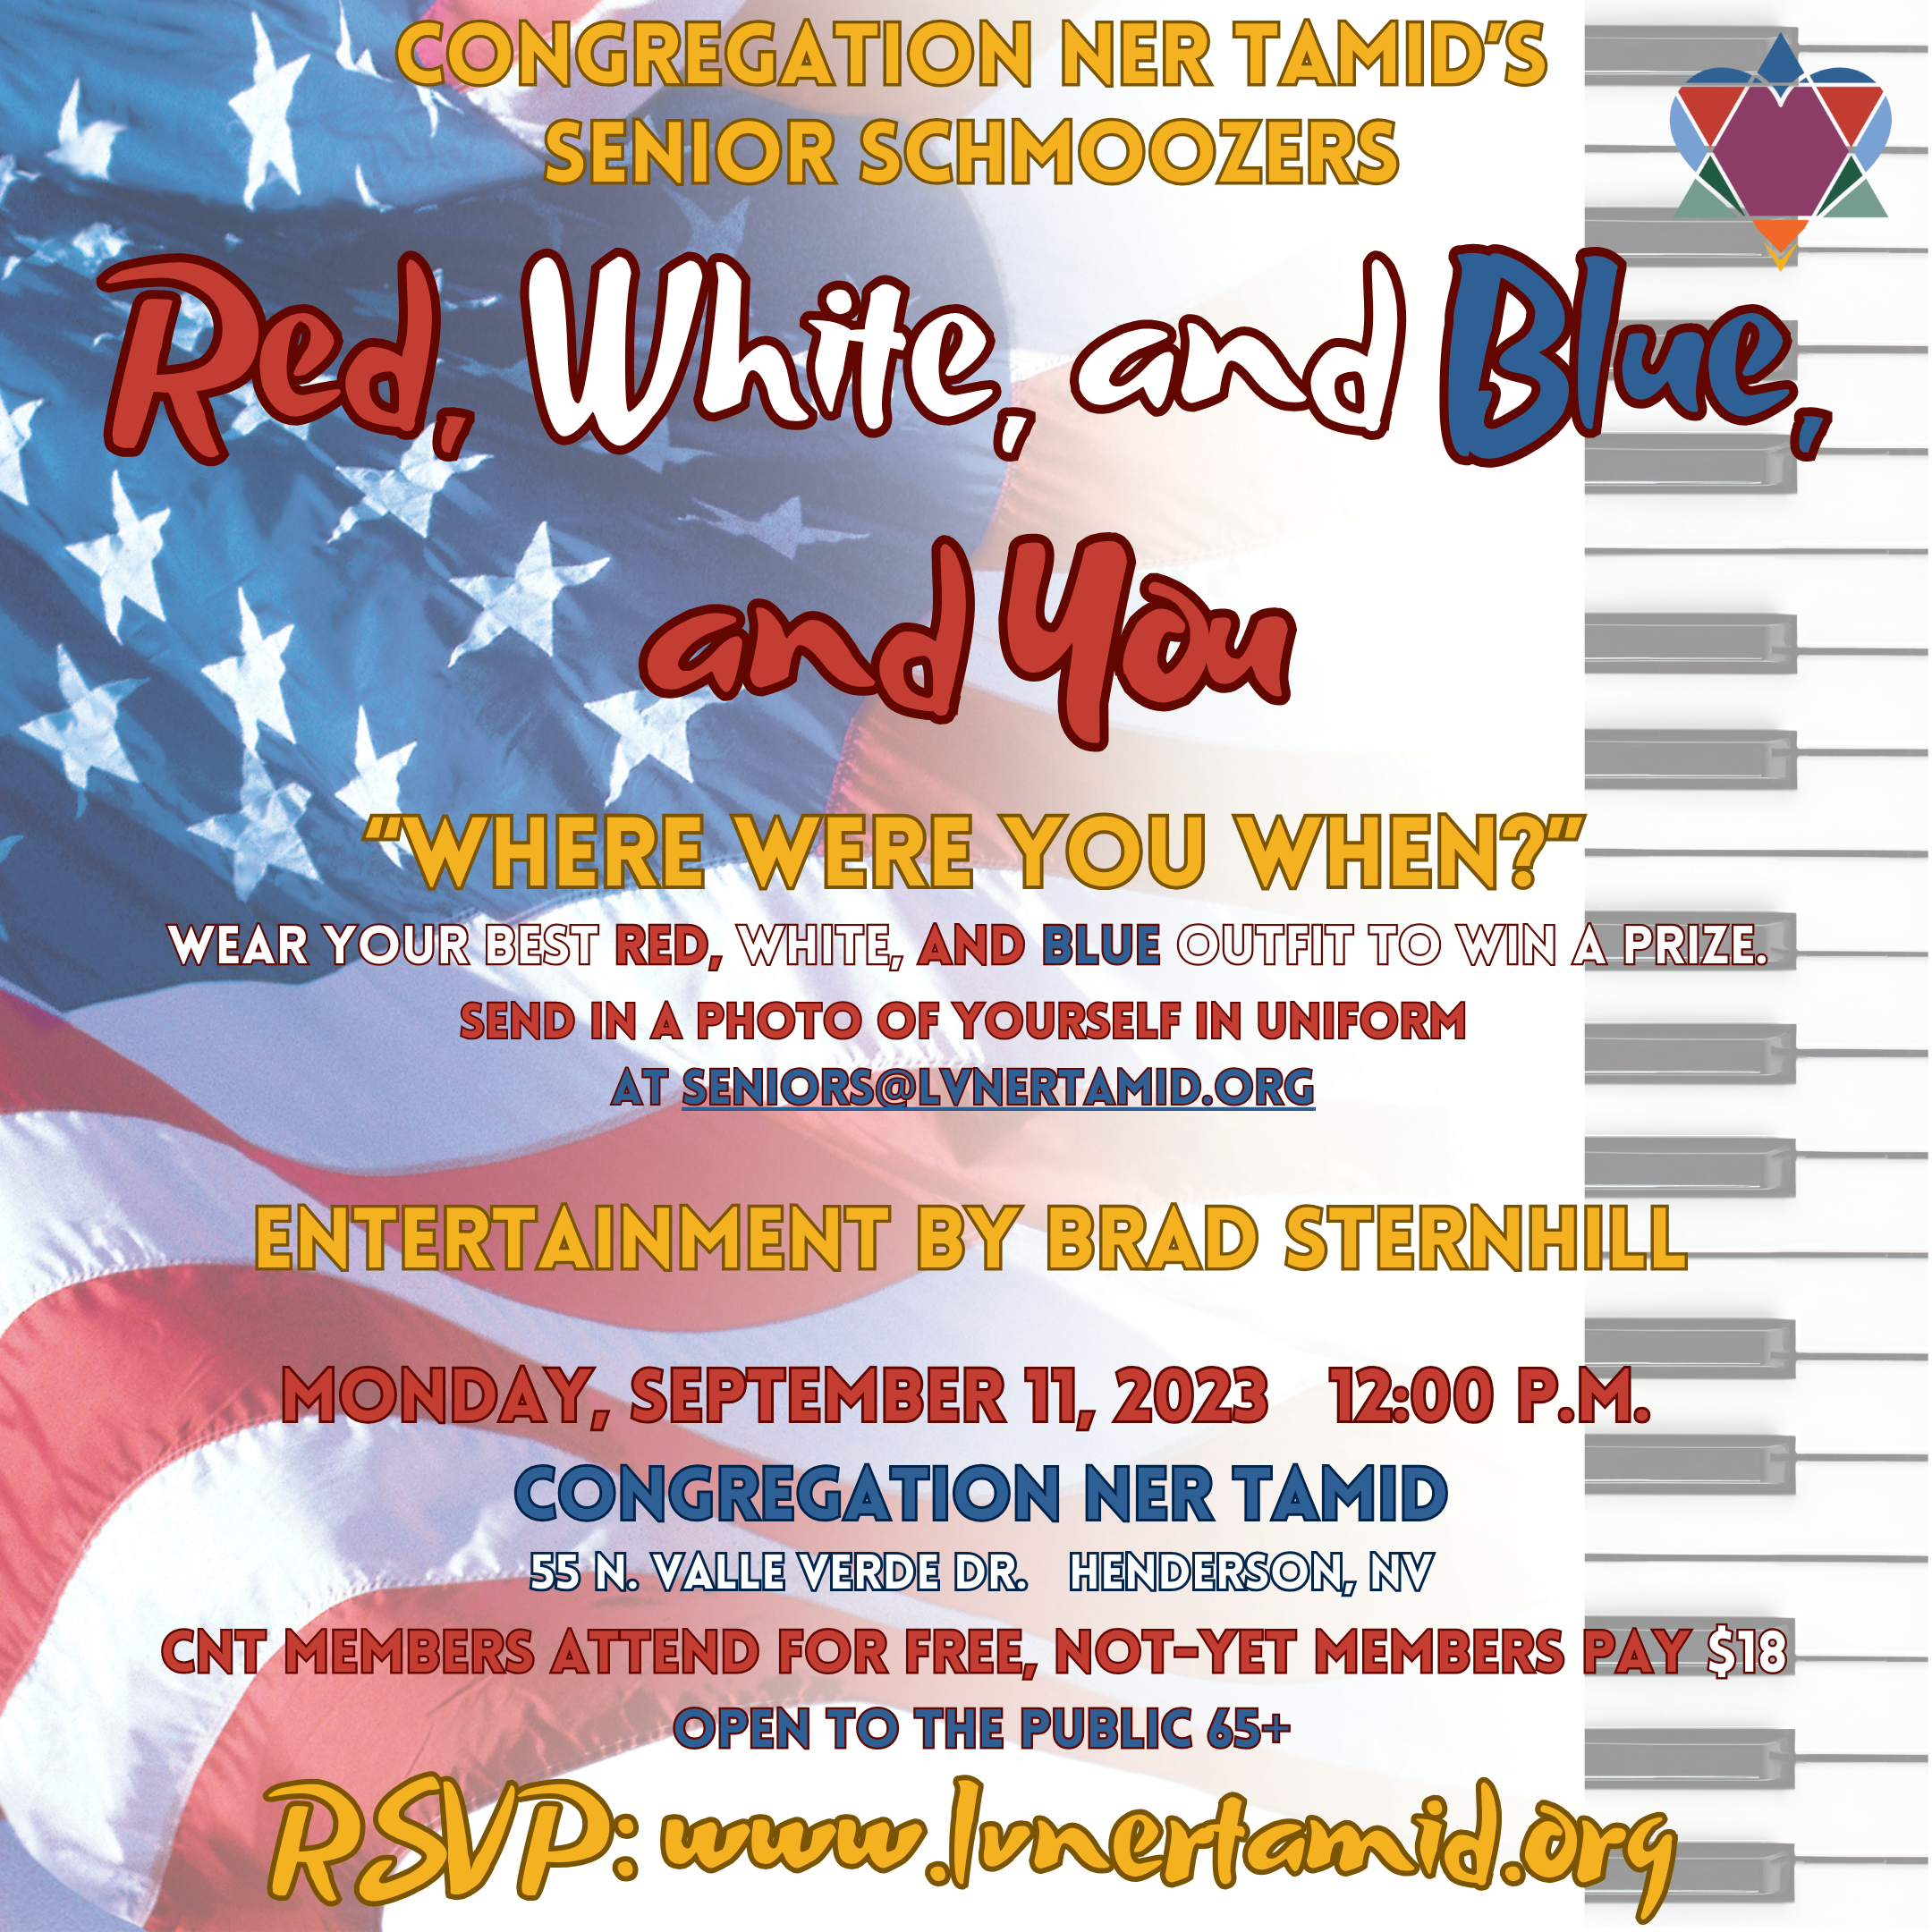 SENIORS PROGRAM - RED, WHITE, AND BLUE AND YOU